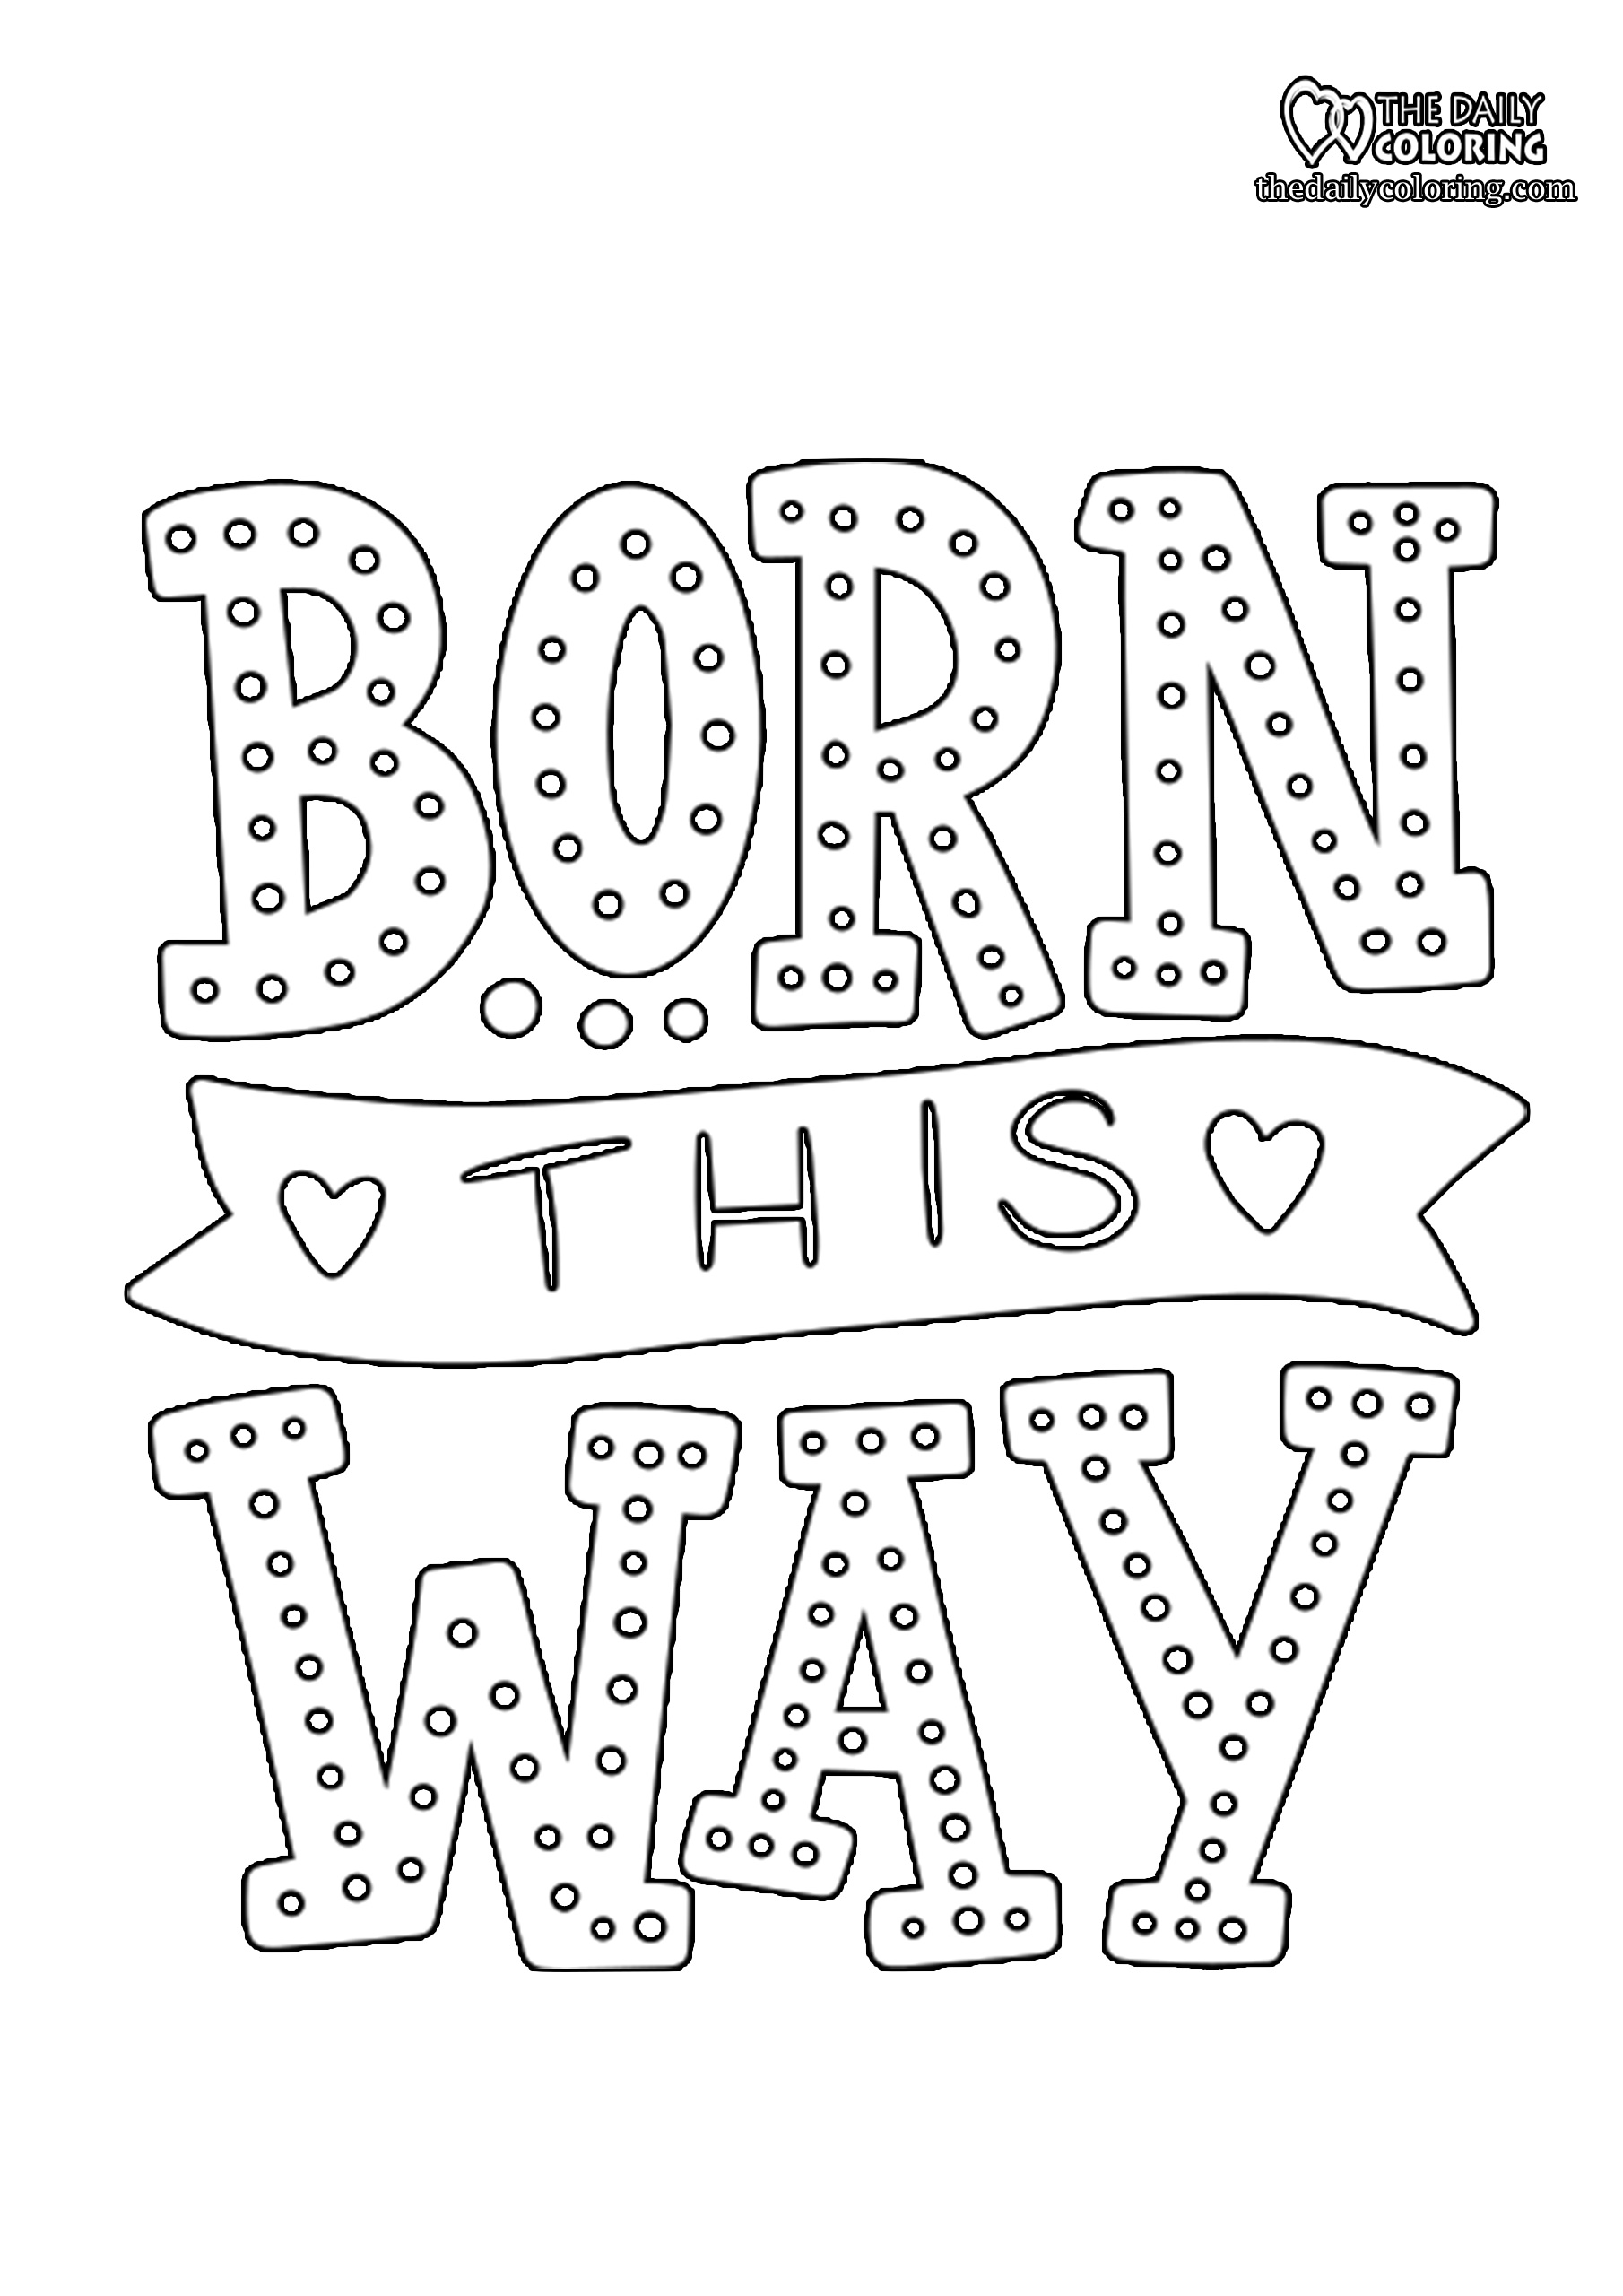 born-this-way-coloring-page